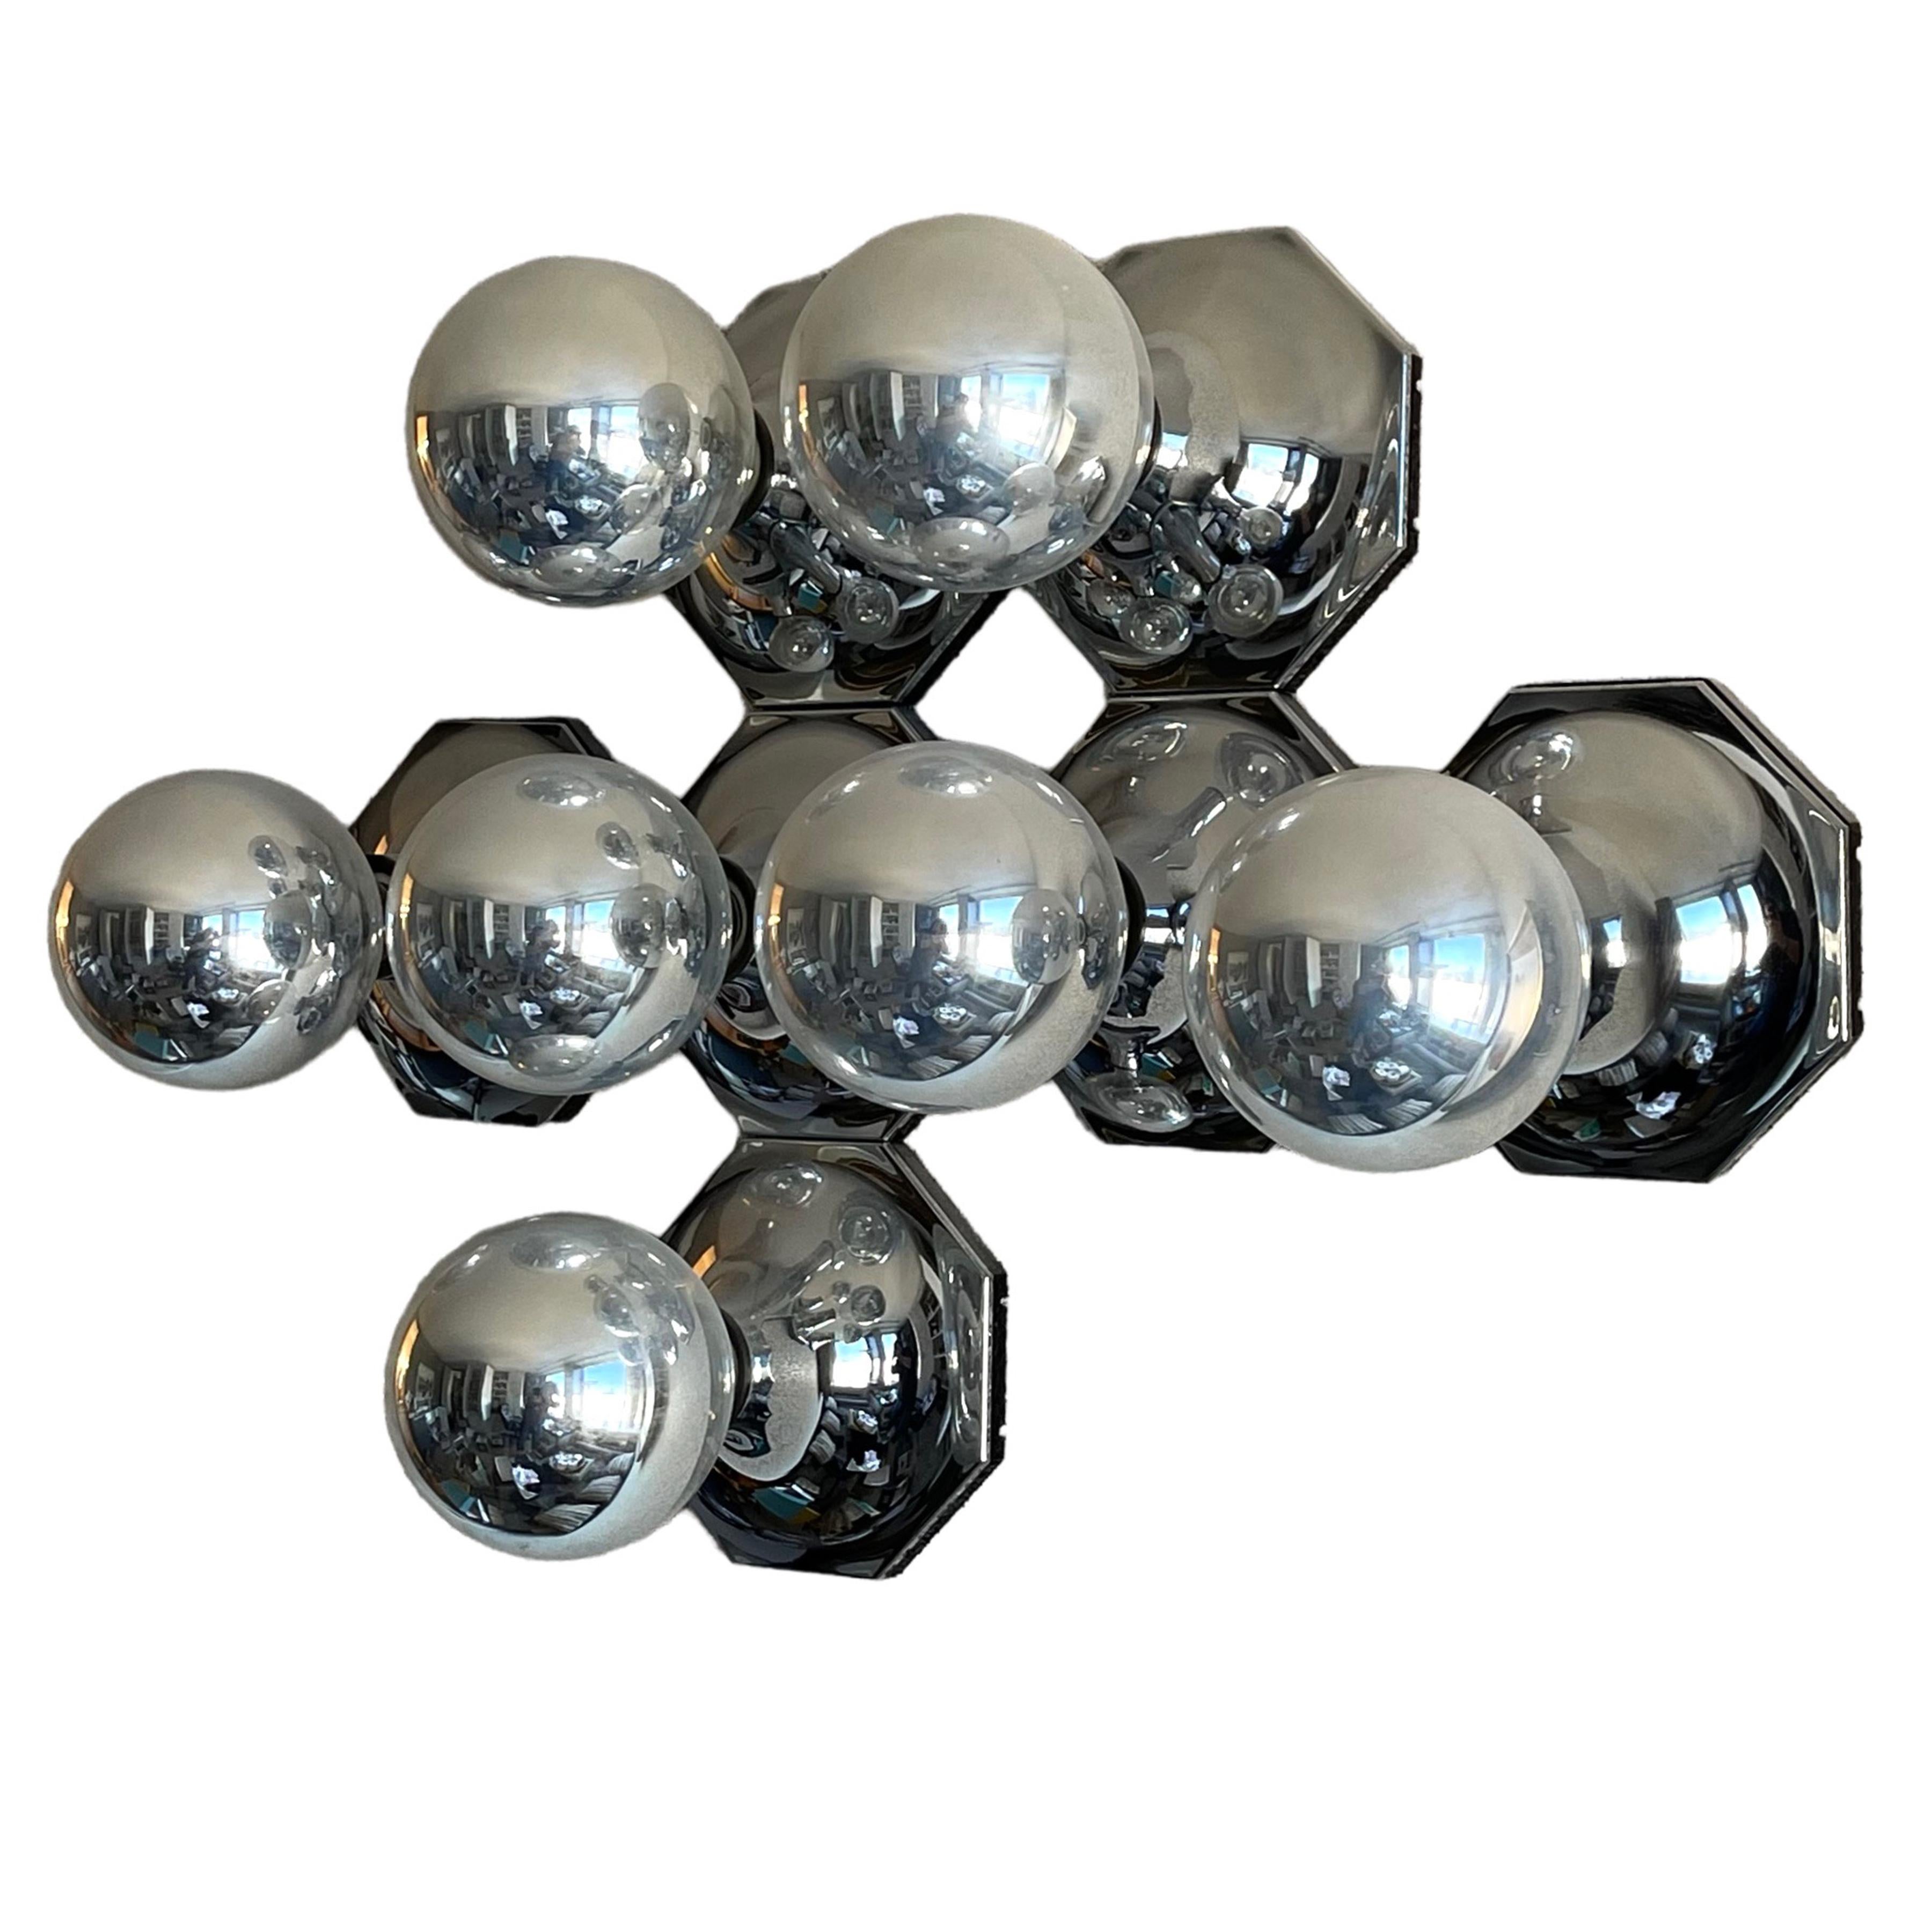 Designed by Motoko Ishii for Staff Leuchten, Germany in the 1970s these terrific lamps are equal parts lighting and sculpture. The bases are made of chrome-plated plastic and metal with a hexagonal form. They can be installed individually, or in